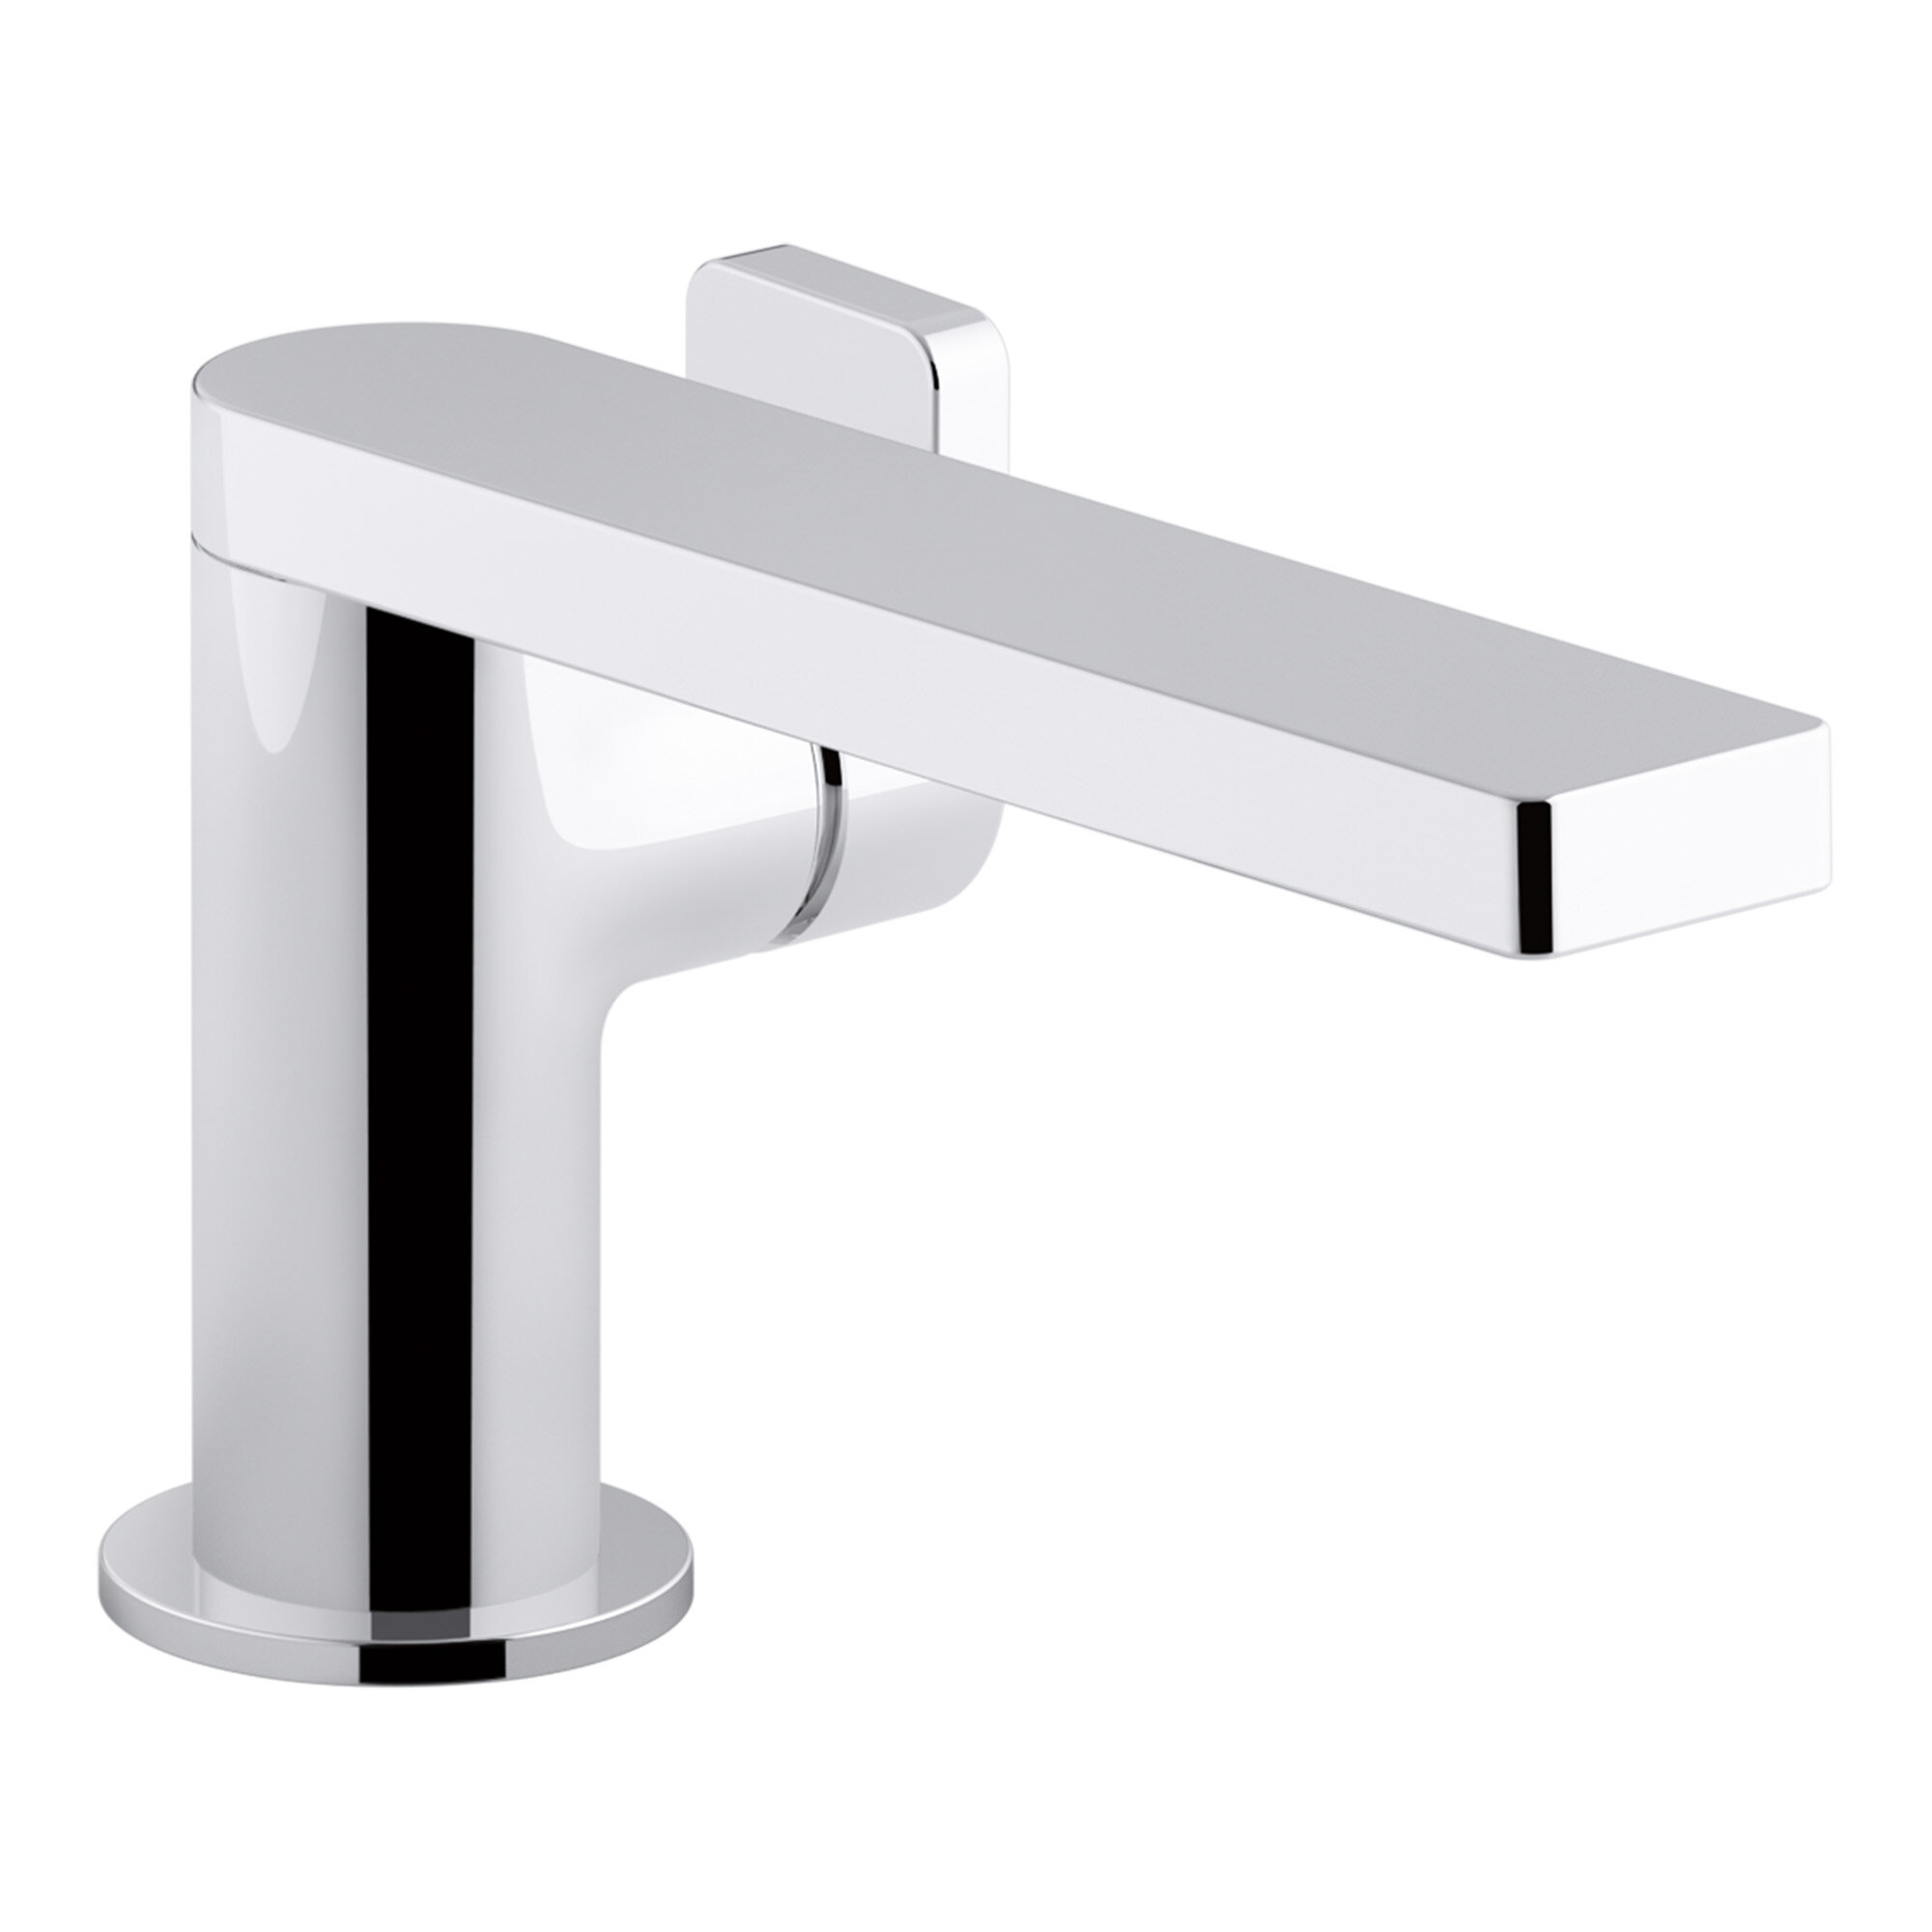 Kohler Composed Single Handle Bathroom Faucet With Drain Assembly Reviews Wayfair